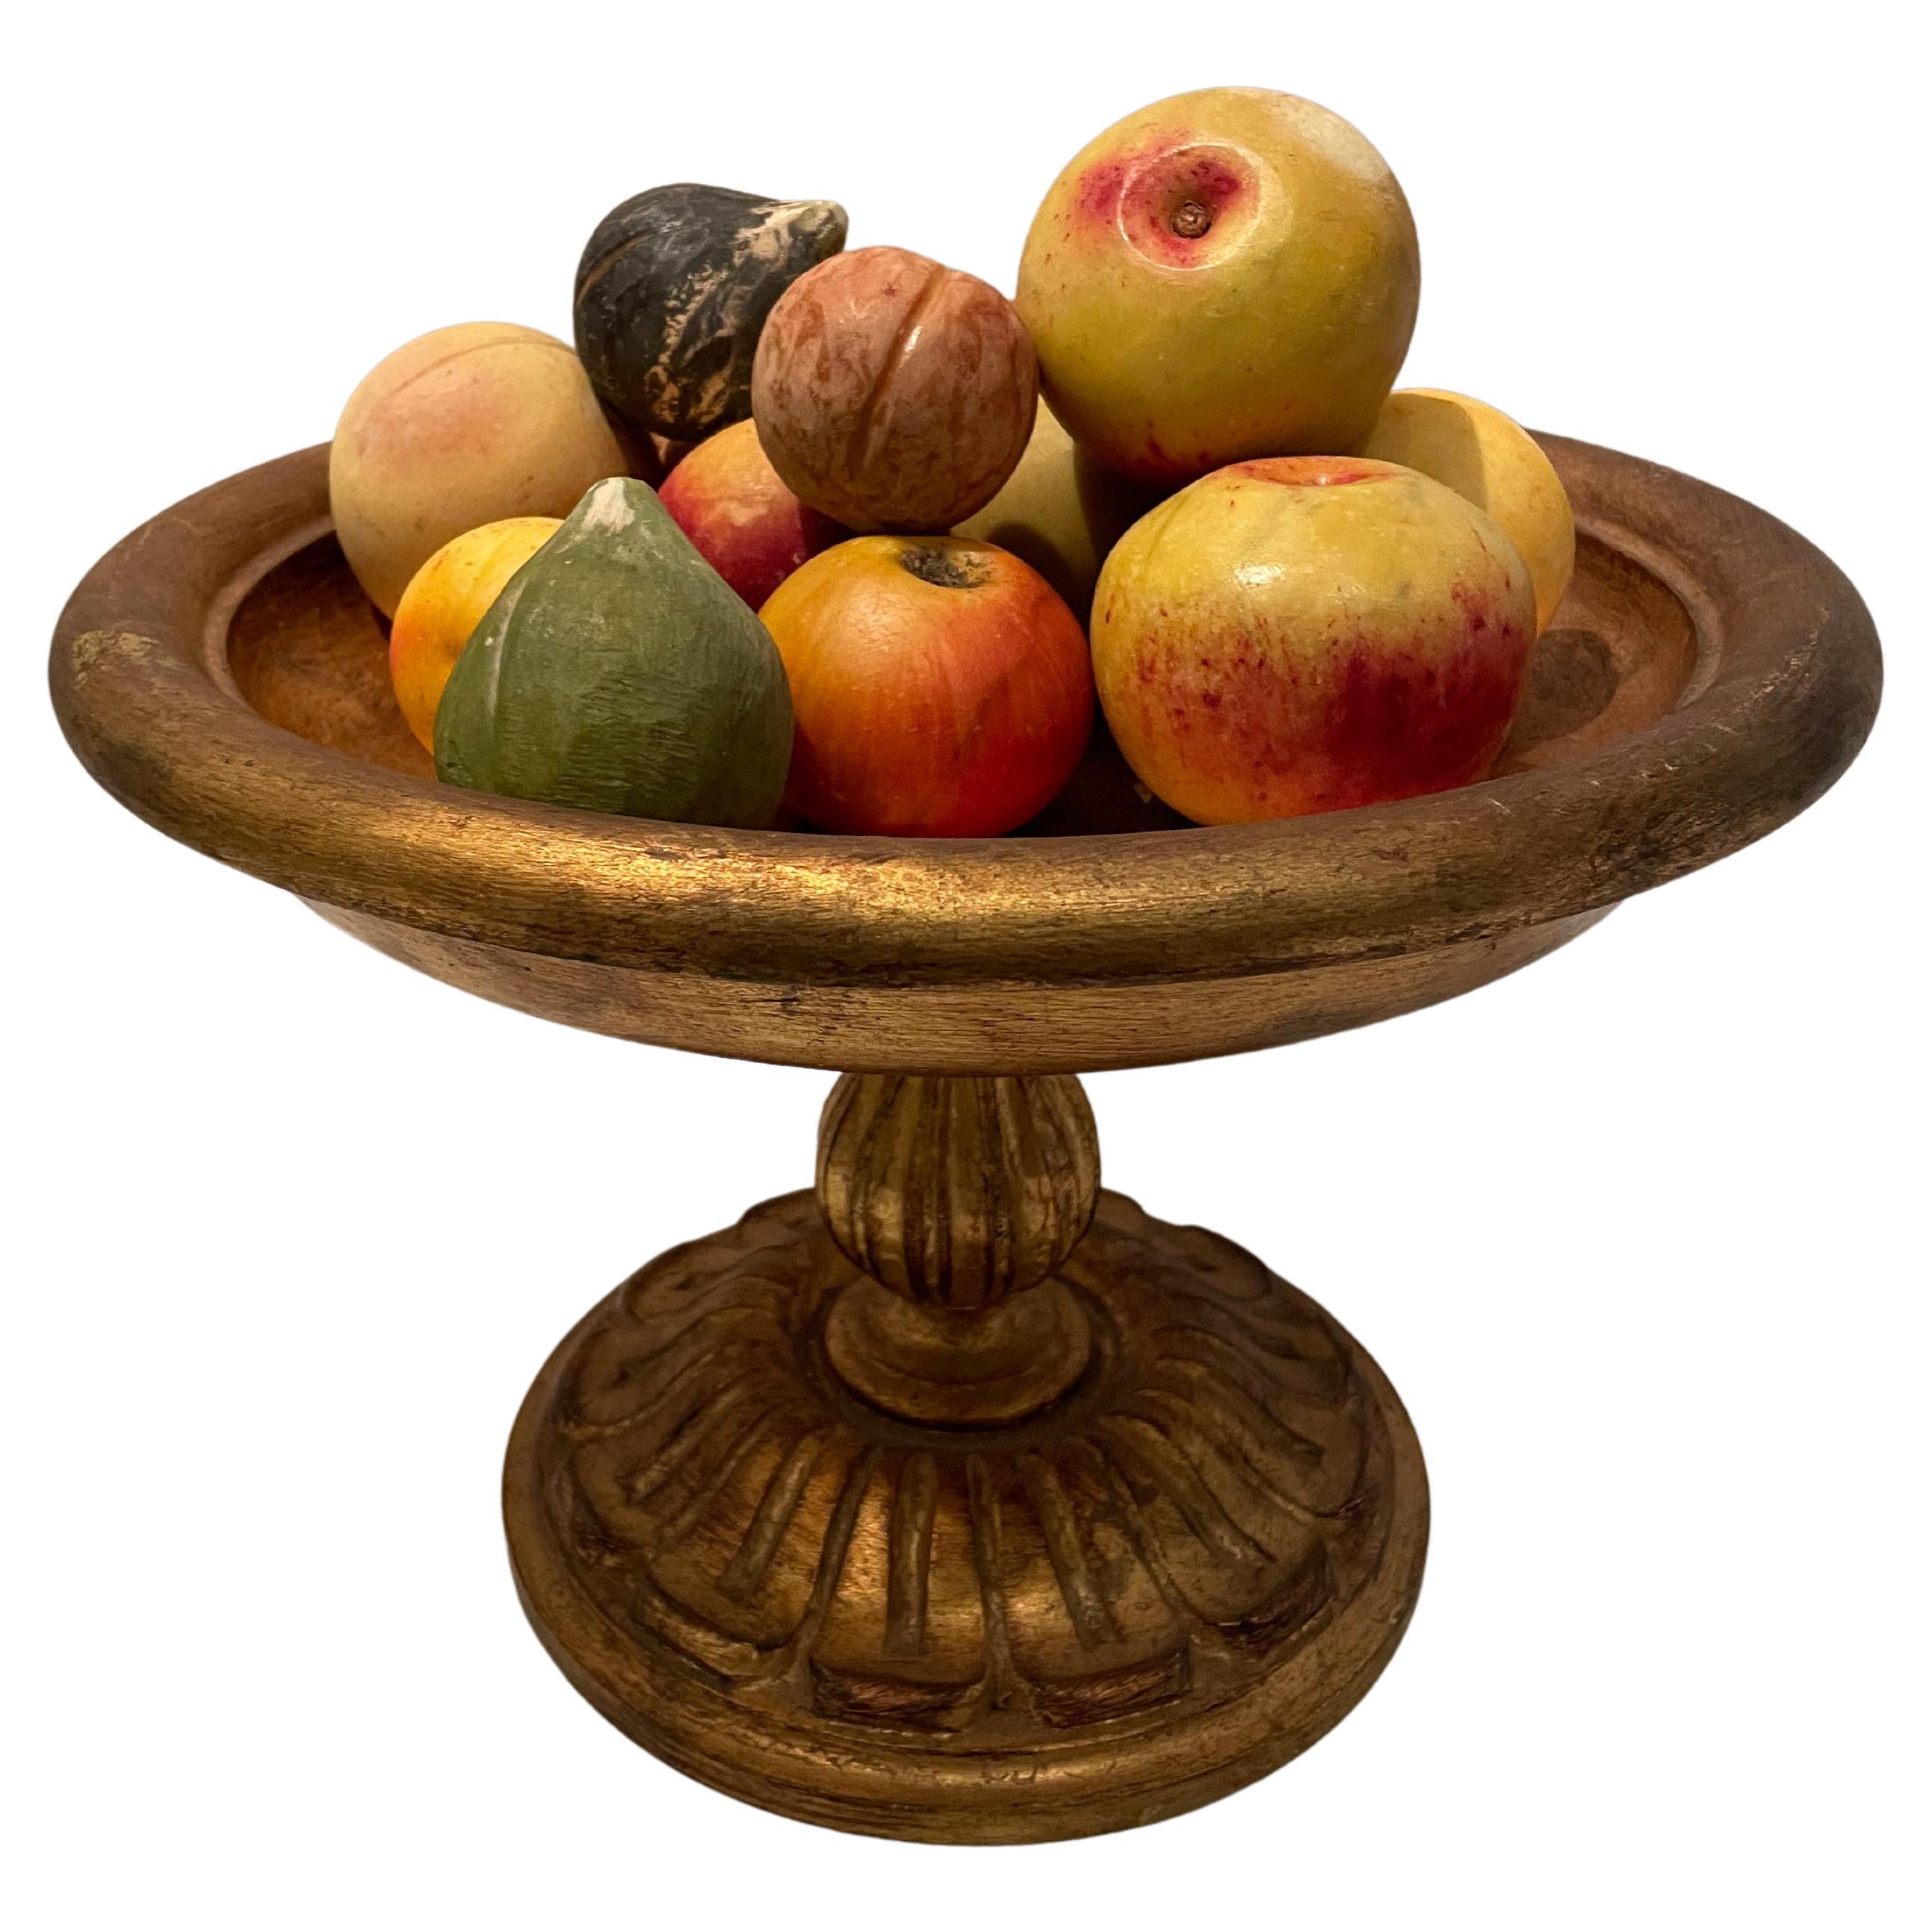 Vintage Giltwood Italian Tazza Bowl with Decorative Stone Fruit For Sale